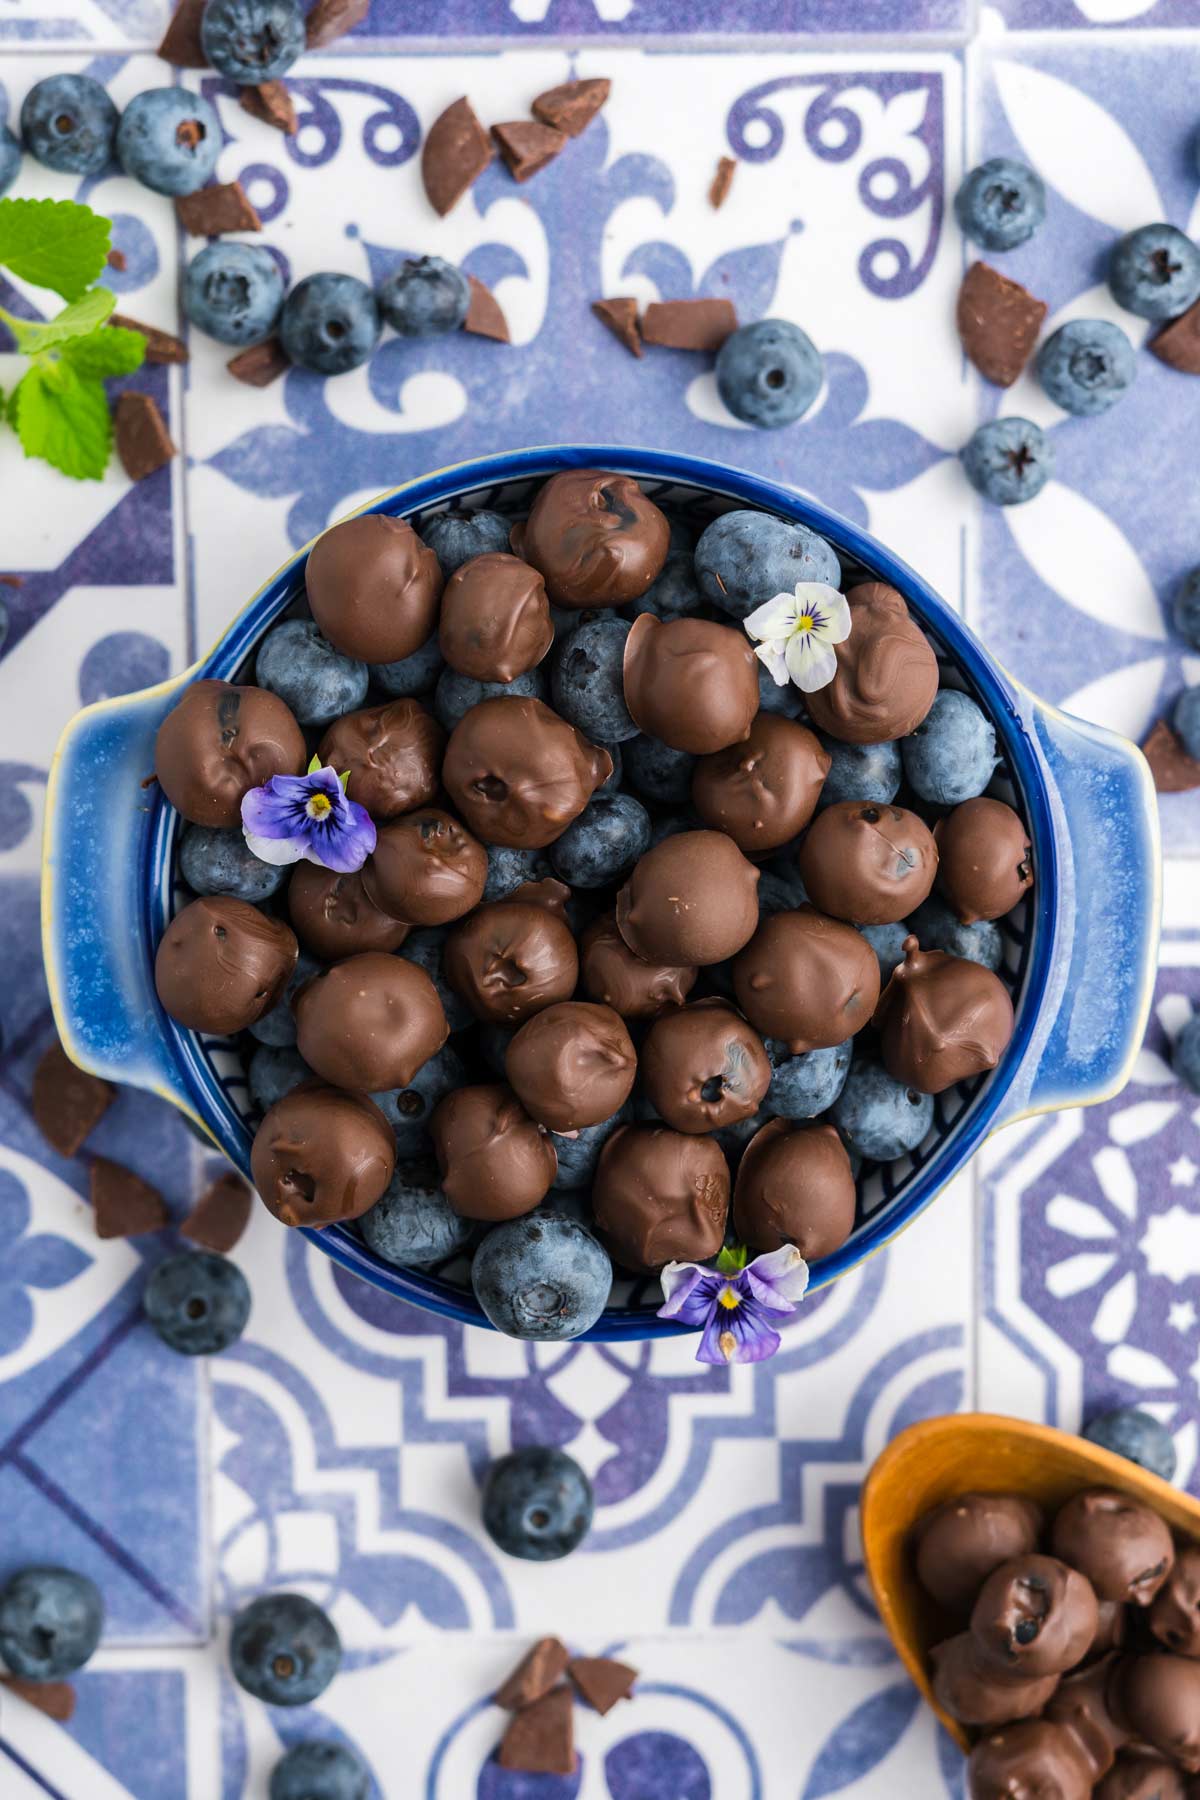 A bowl of chocolate covered blueberries on the table on a blue and white tile background.